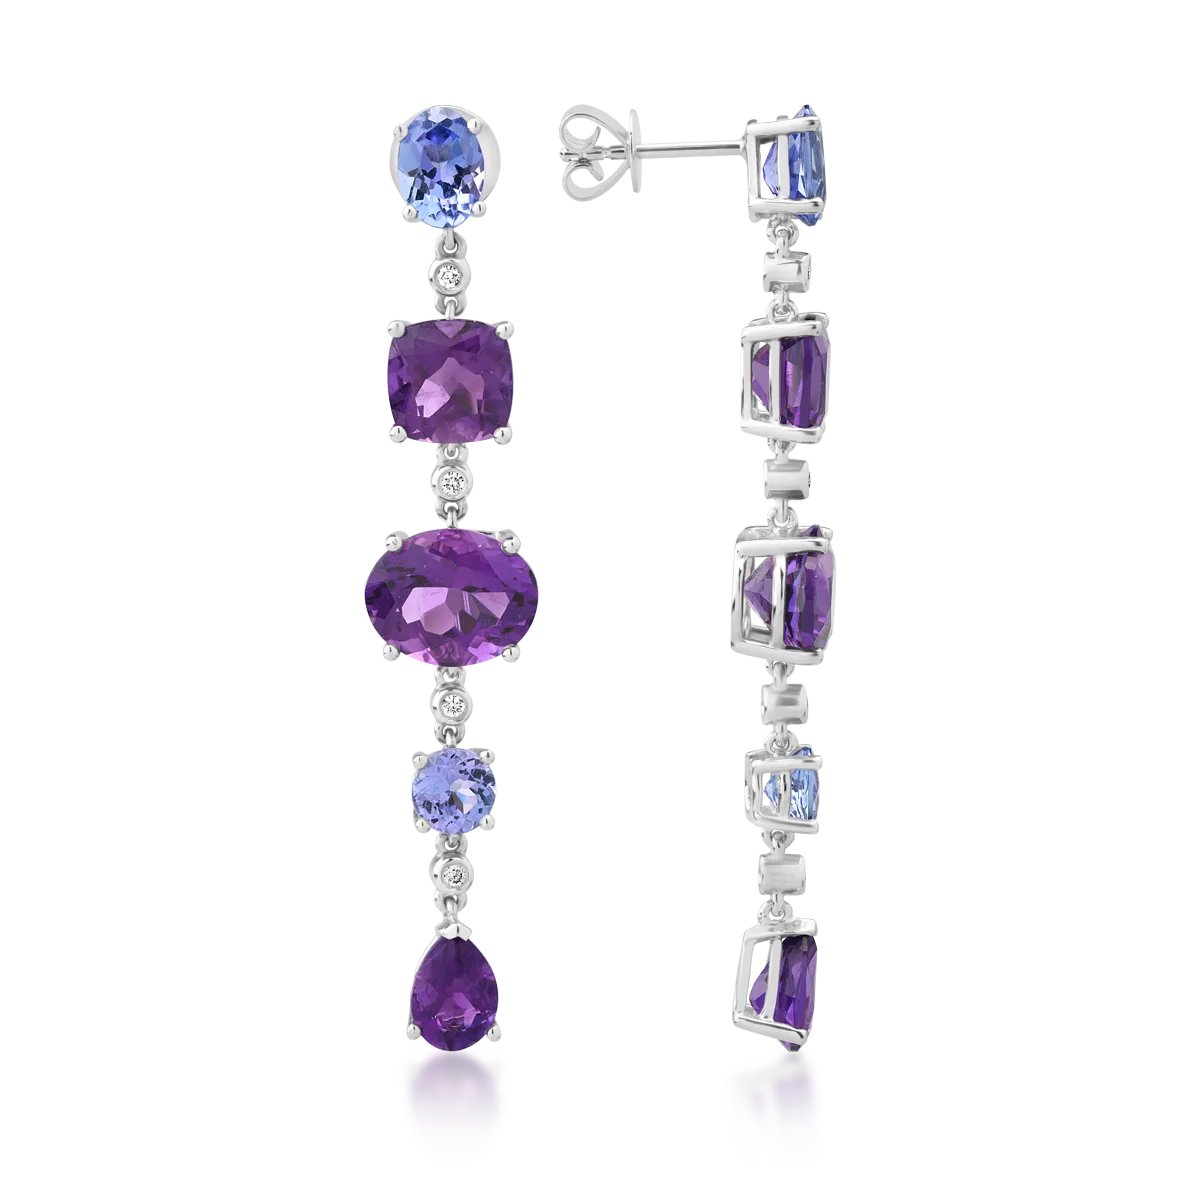 18K white gold earrings with 8.2ct amethysts and 1.7ct tanzanite